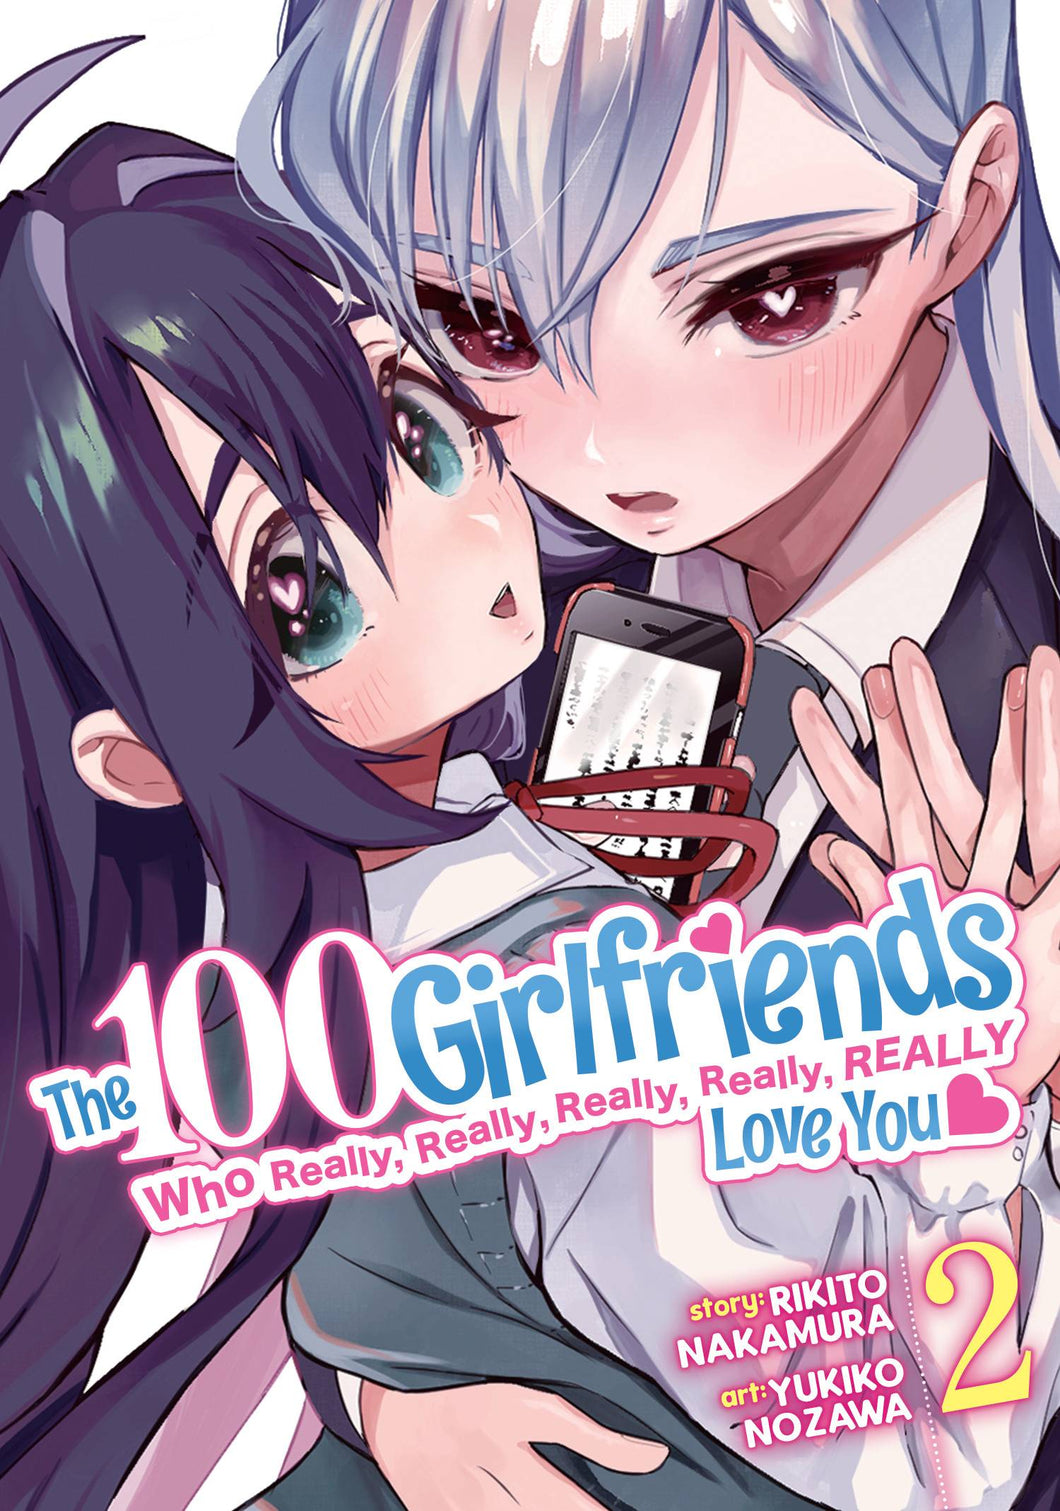 100 Girlfriends Who Really Love You GN Vol 02 - Books